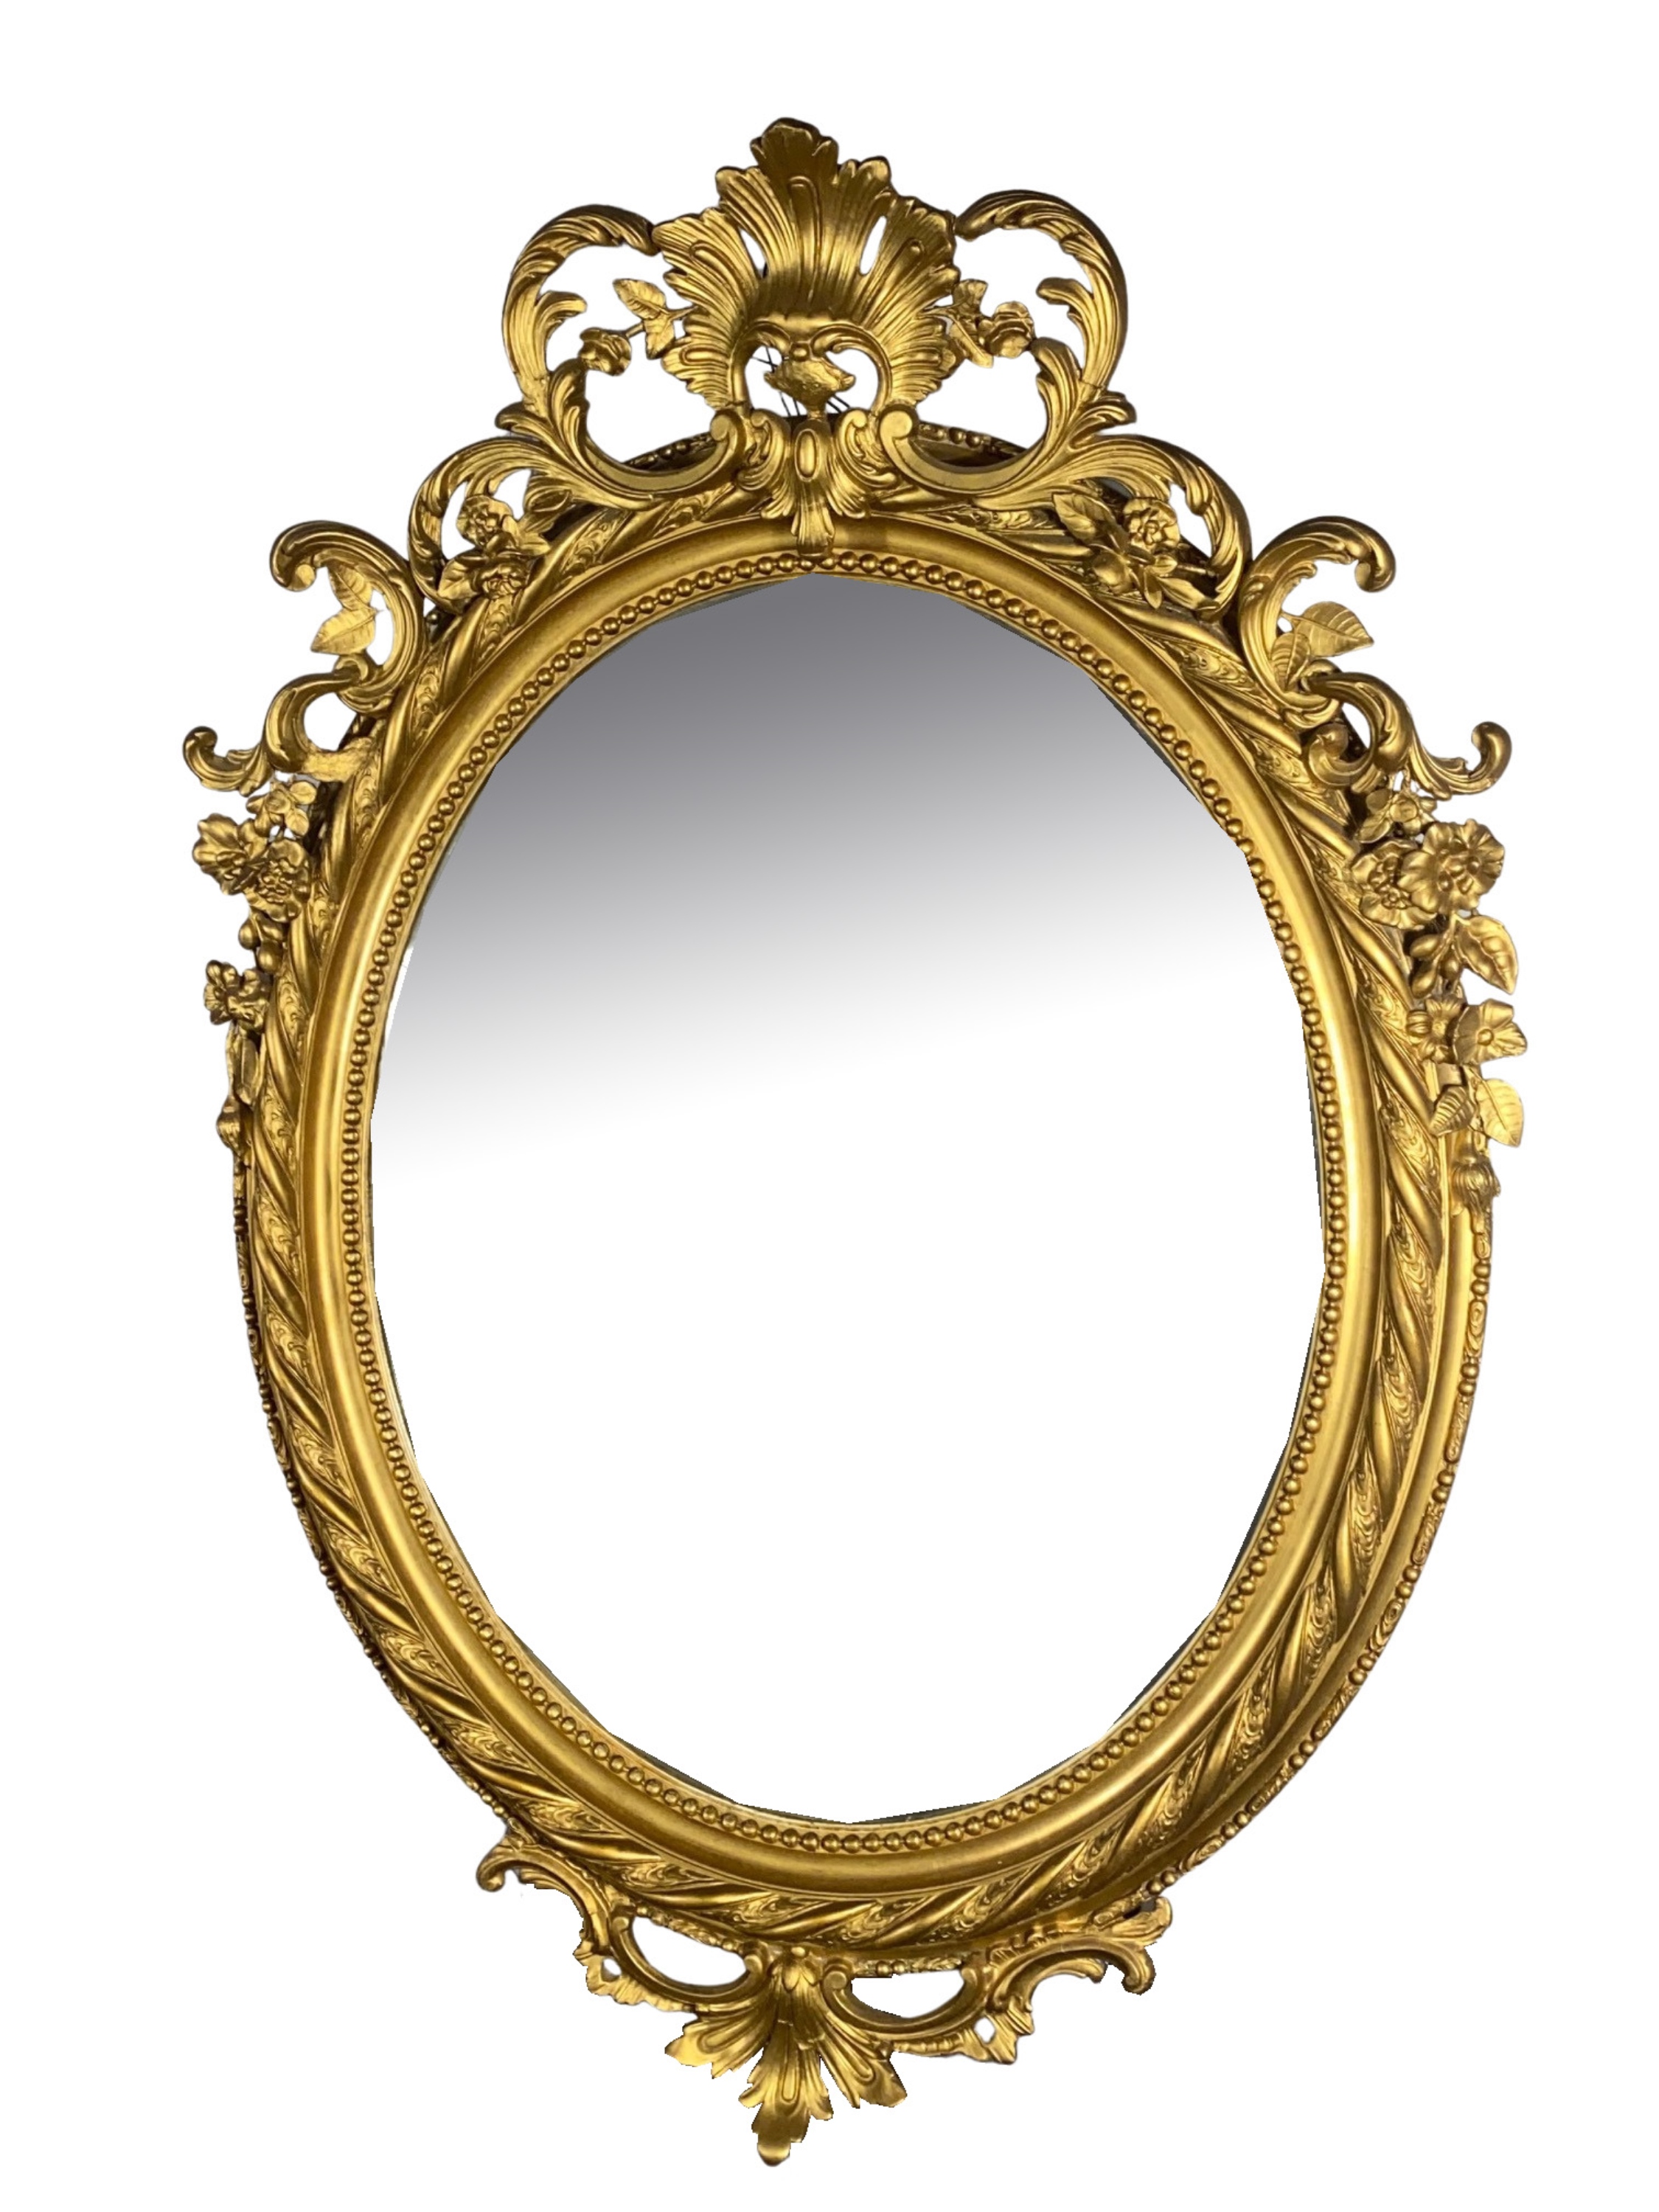 FRENCH LOUIS XV STYLE OVAL MIRROR 2f8b65